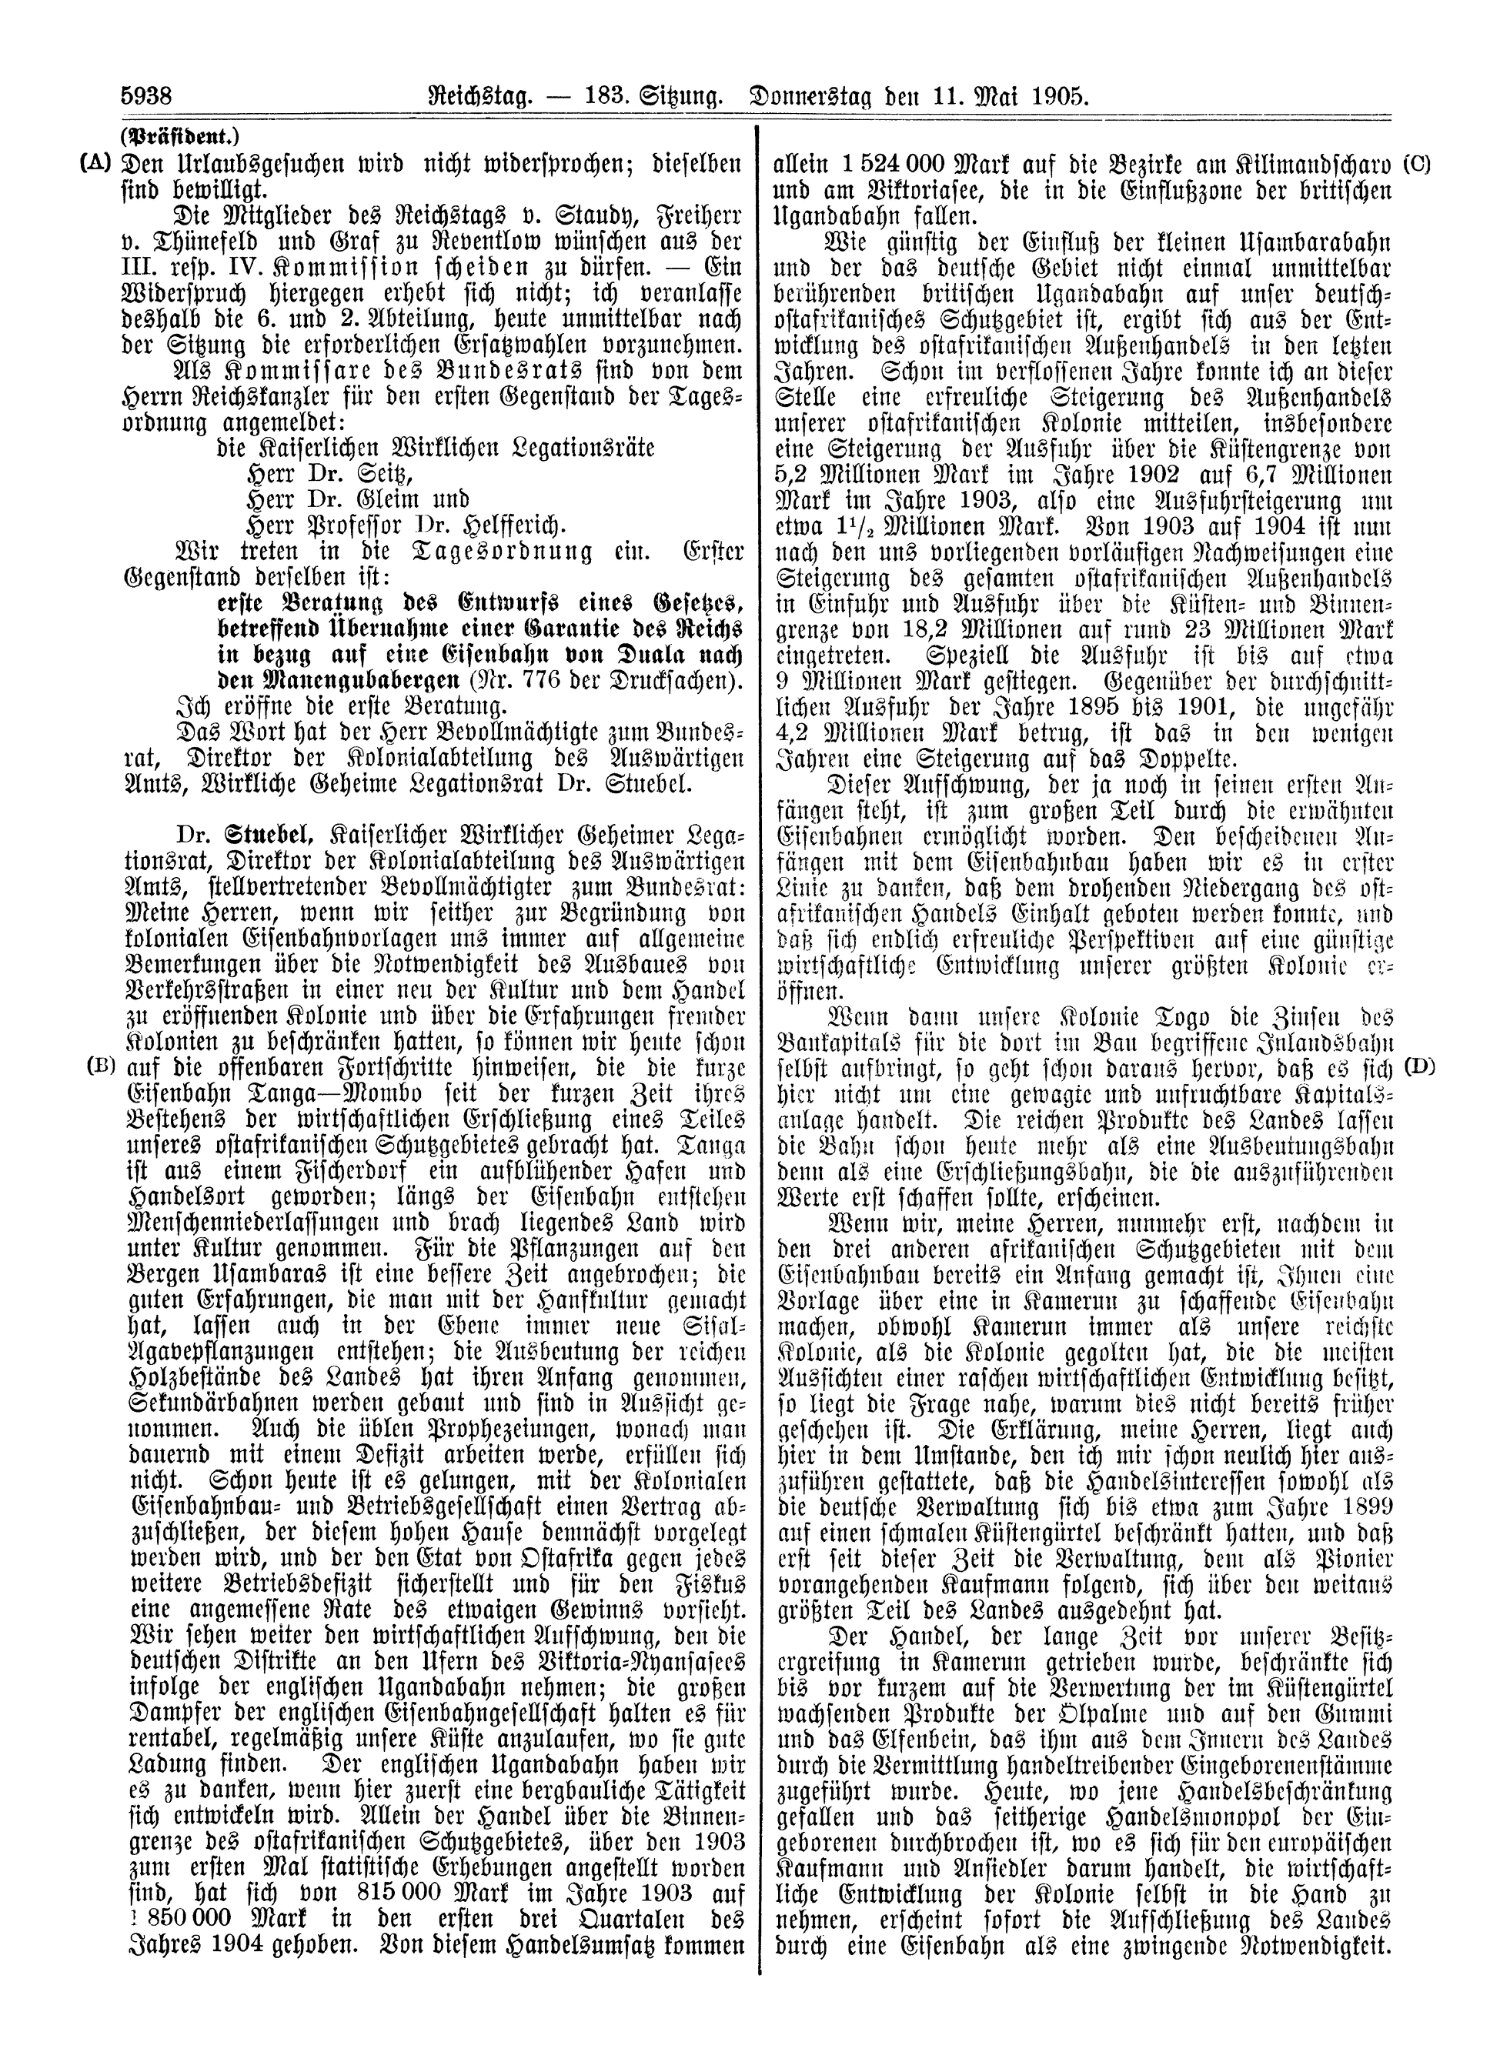 Scan of page 5938